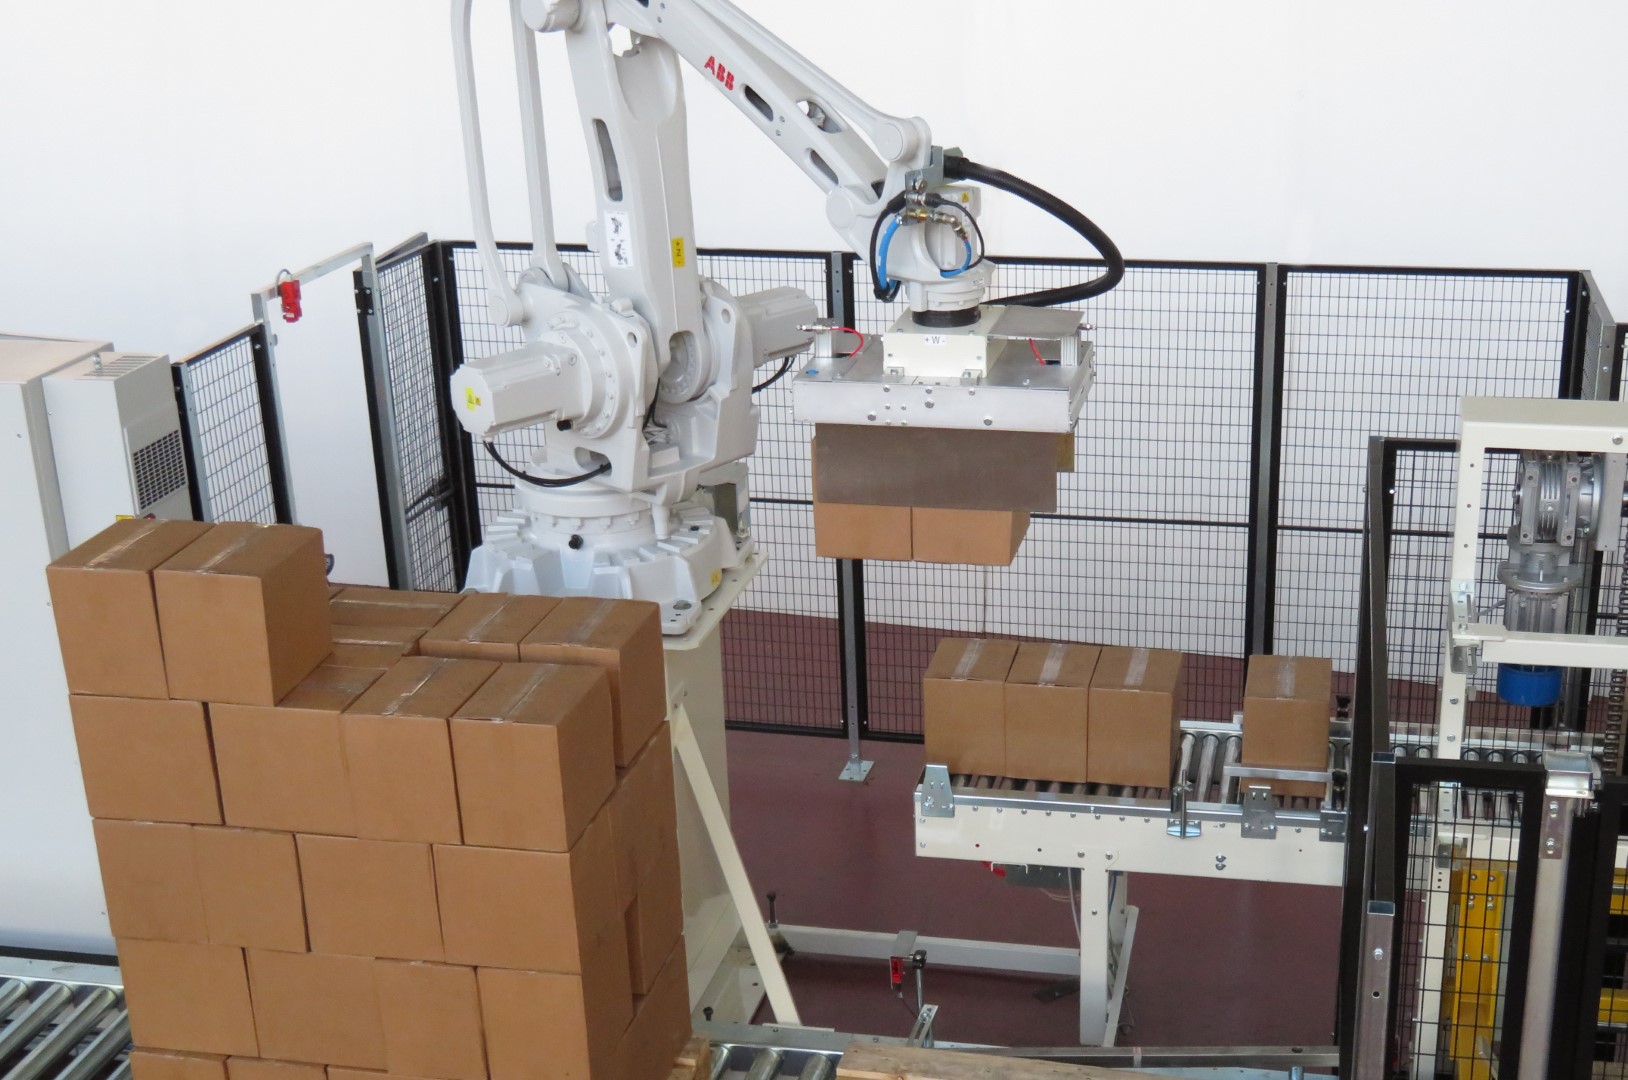 A Logico machine lifts boxes for palletisation